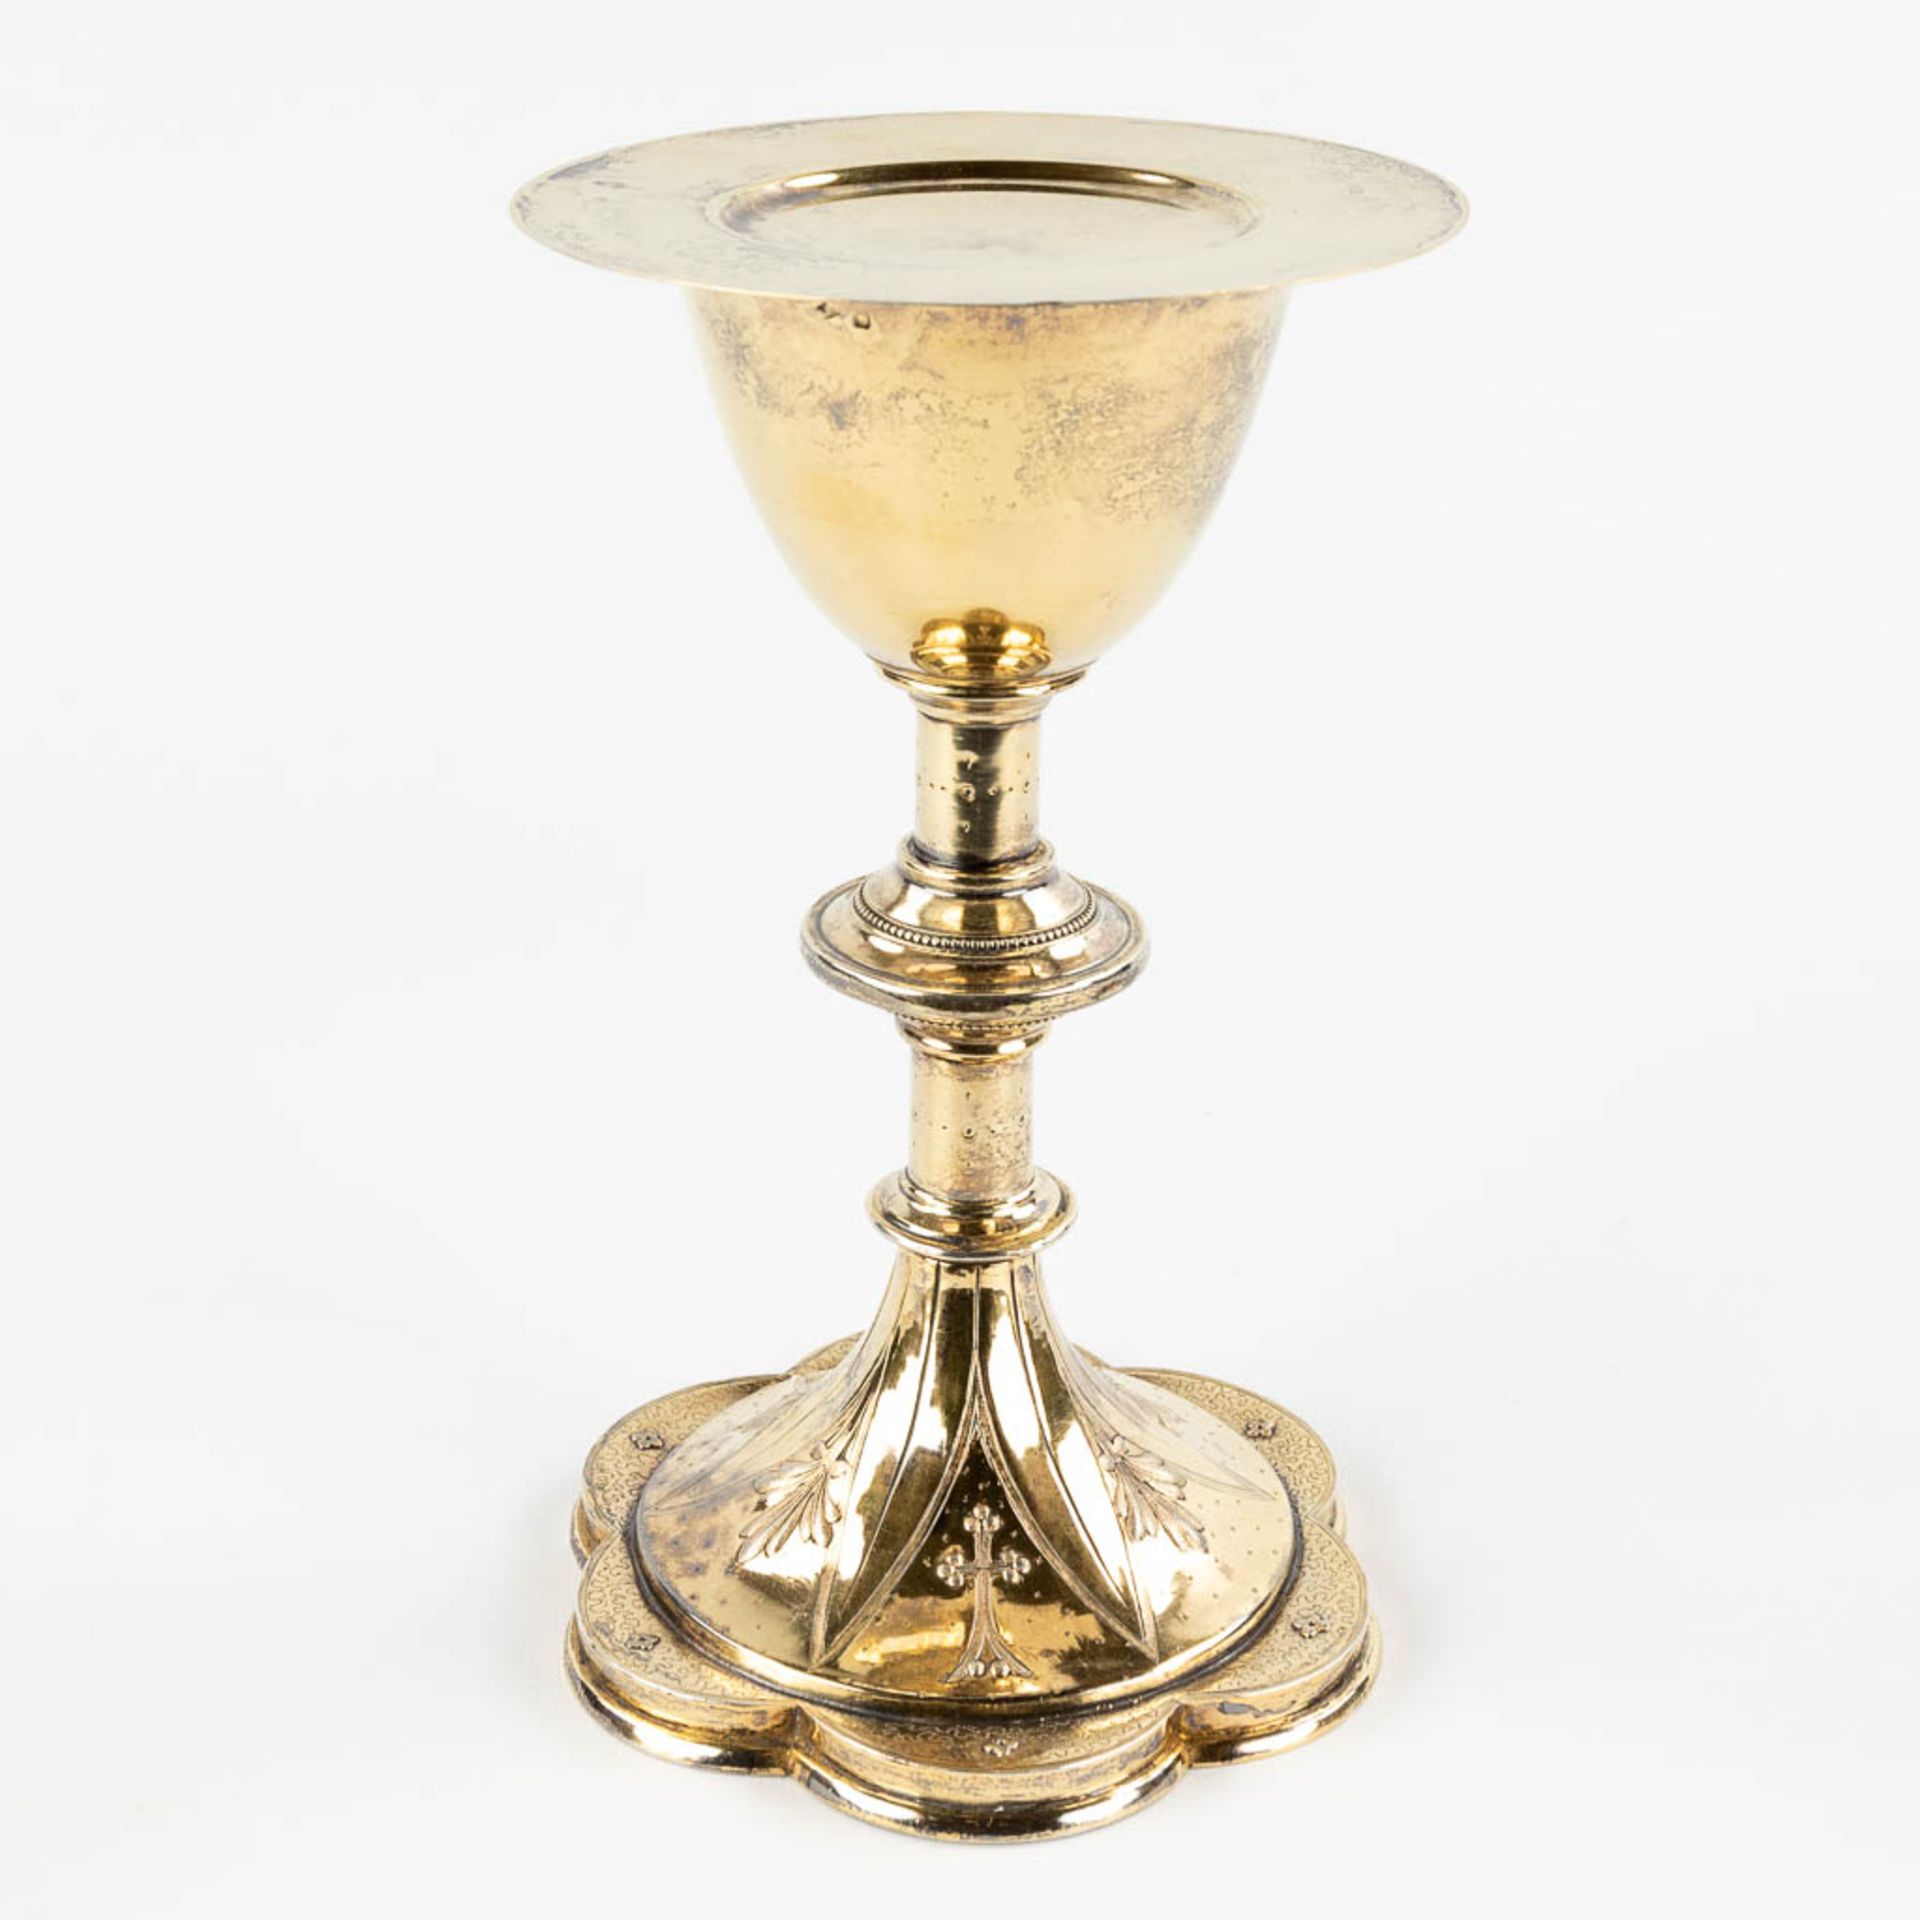 A Chalice with paten, gilt silver in gothic revival style. 305g. (H:19,5 x D:12,5 cm) - Image 3 of 16